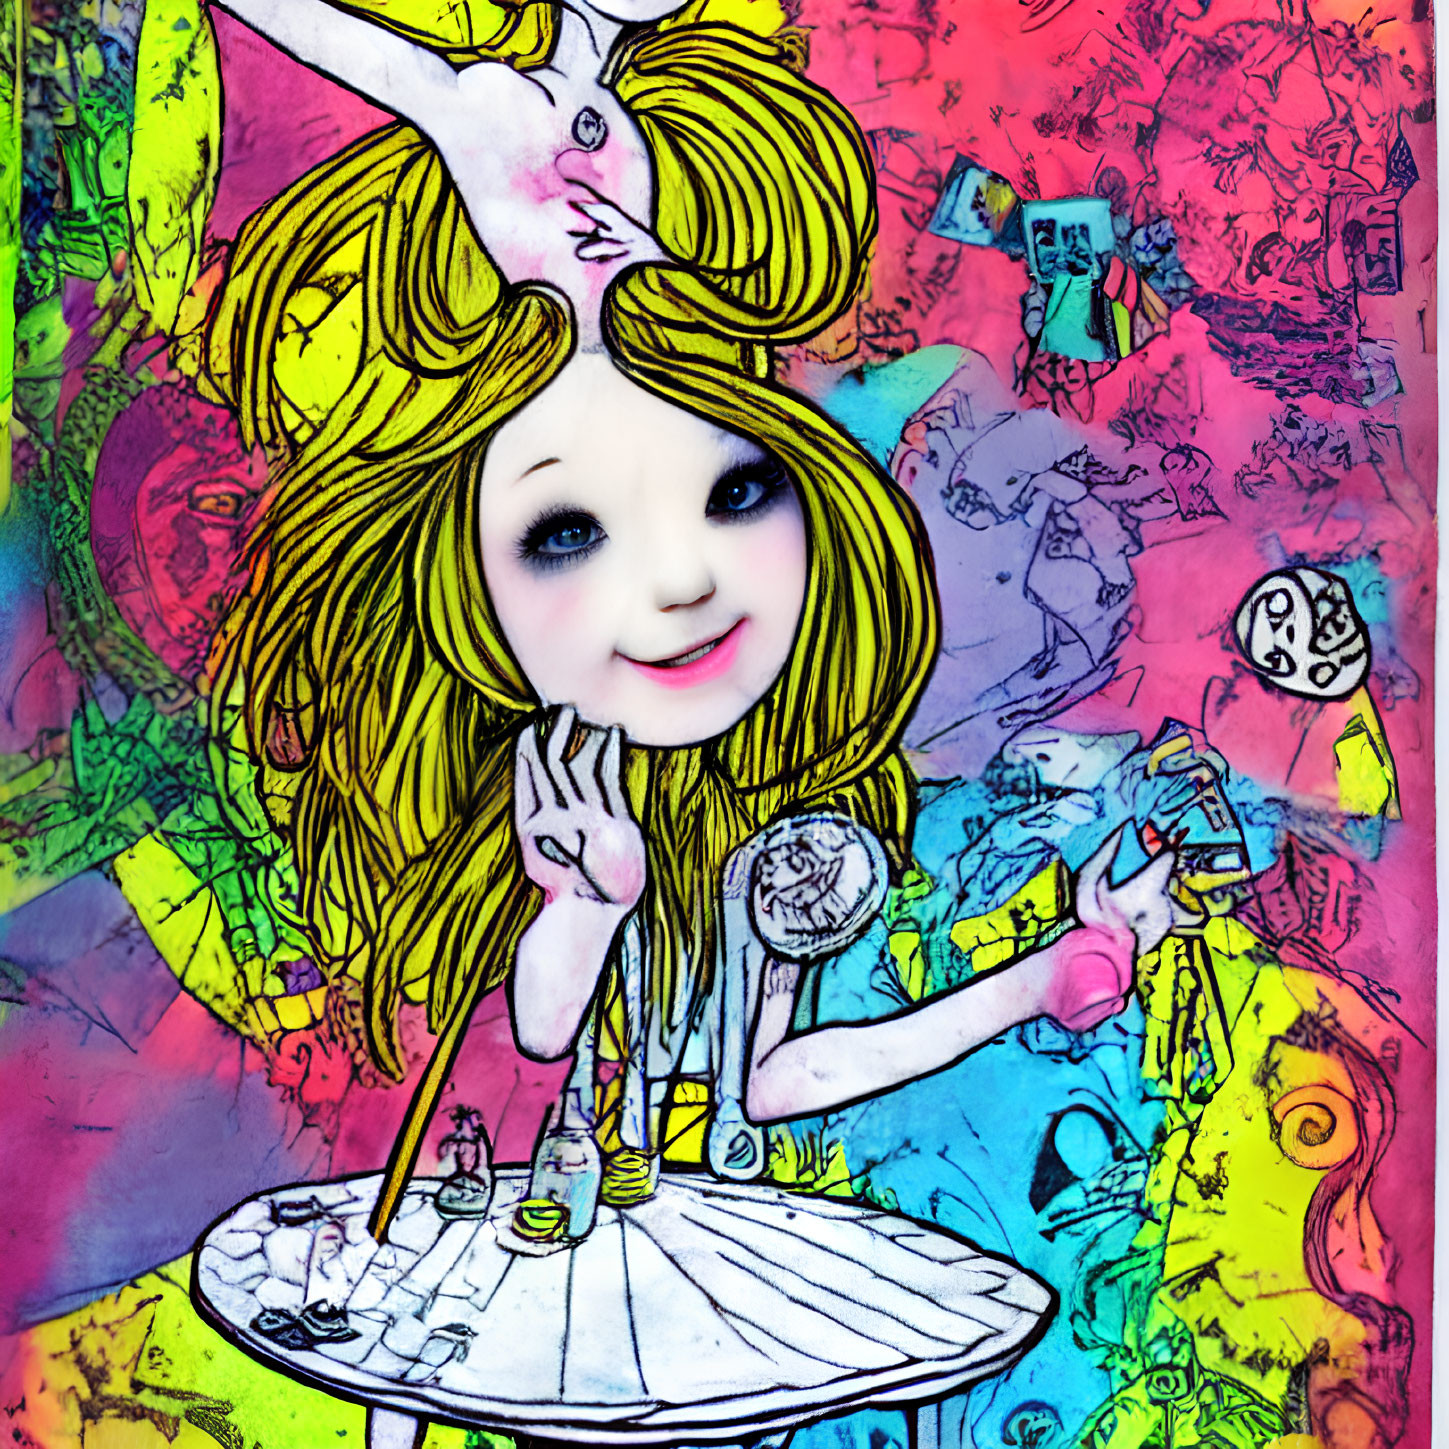 Colorful Surreal Illustration of Caricatured Girl with Abstract Elements